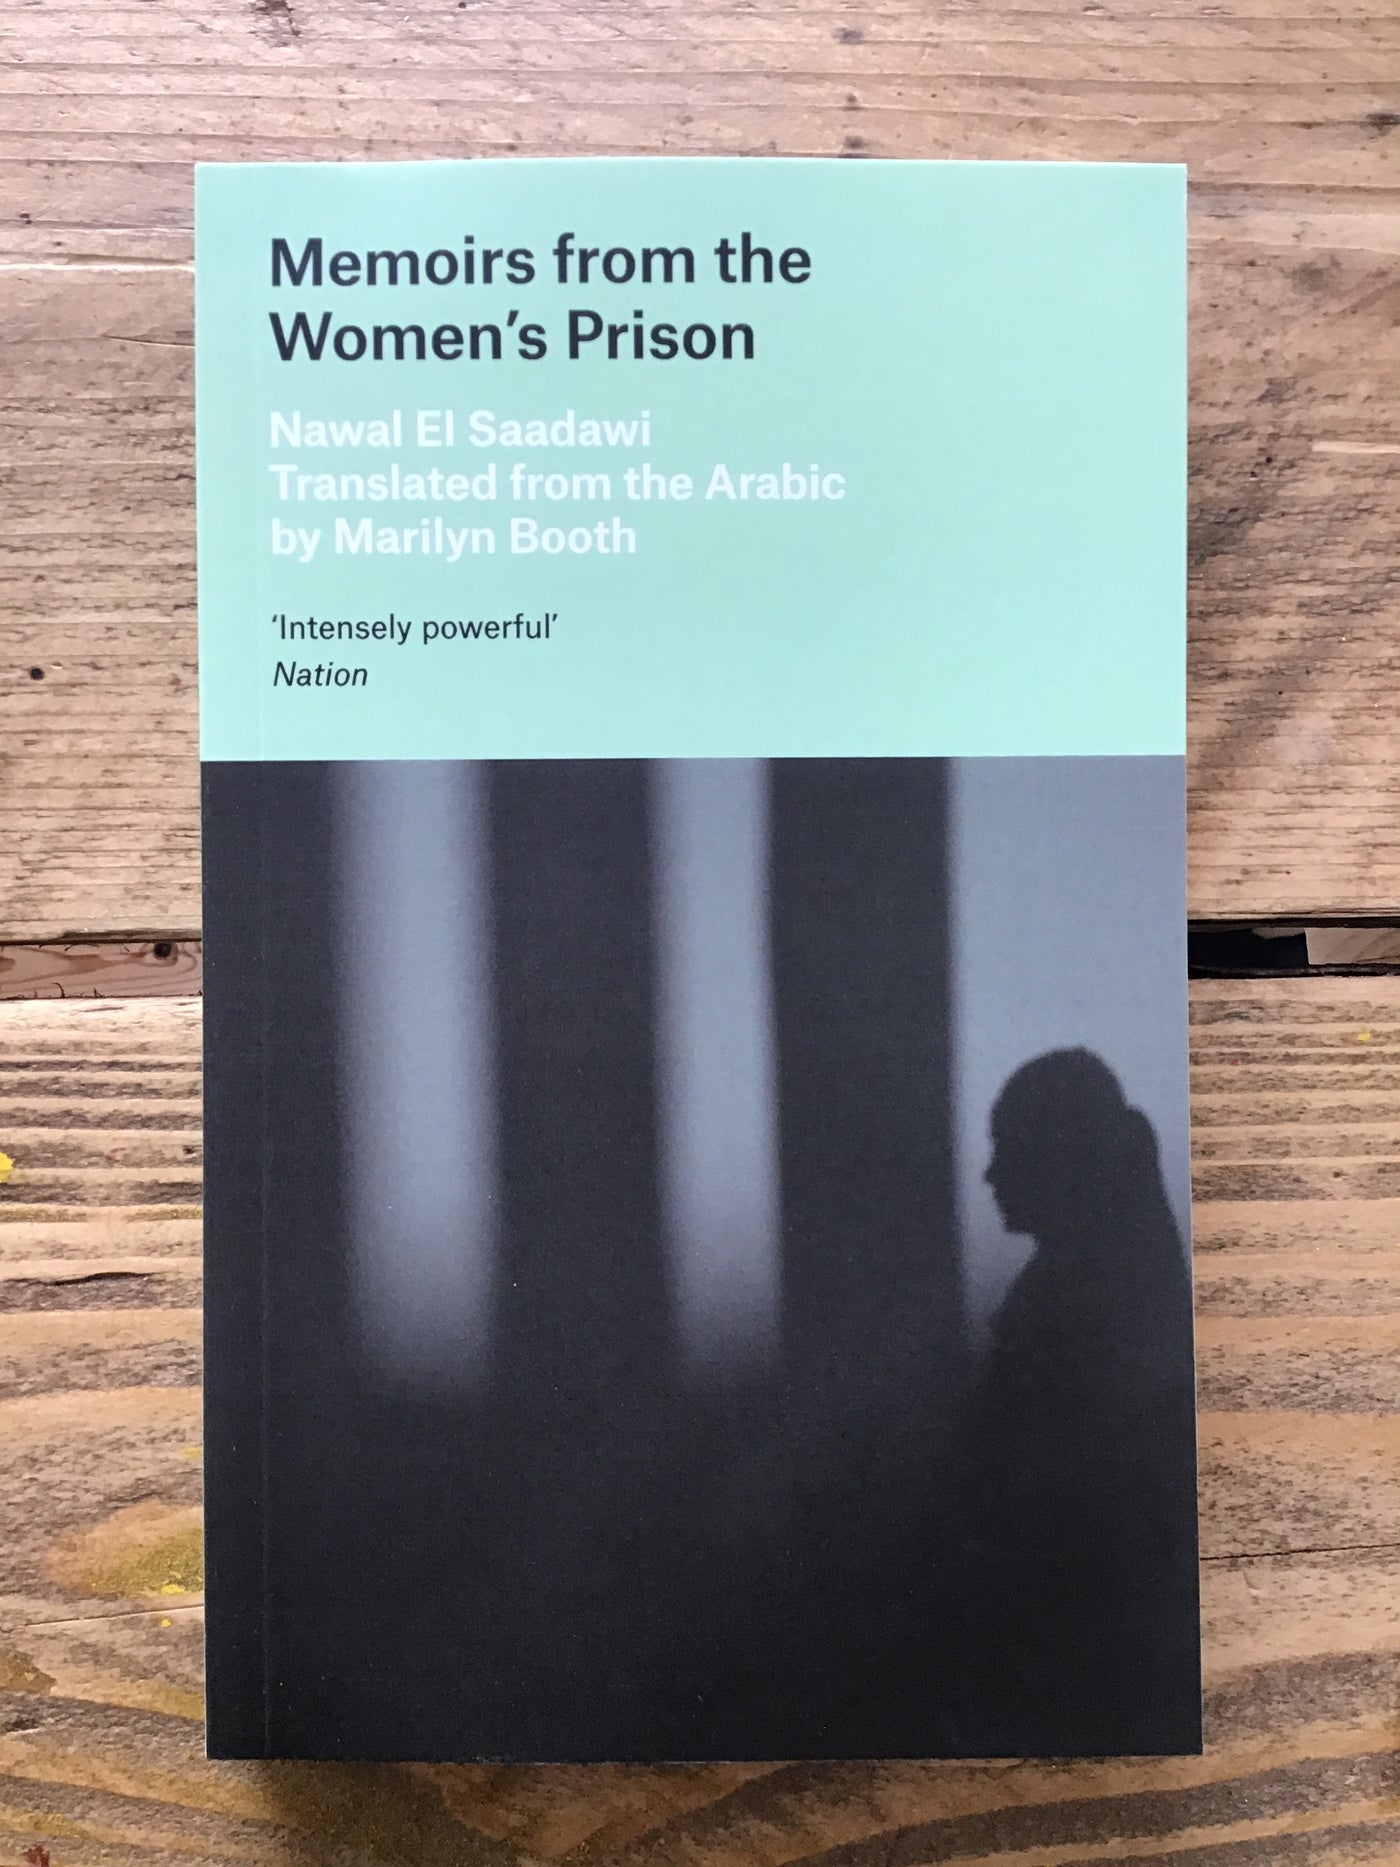 Memoirs from the Women's Prison